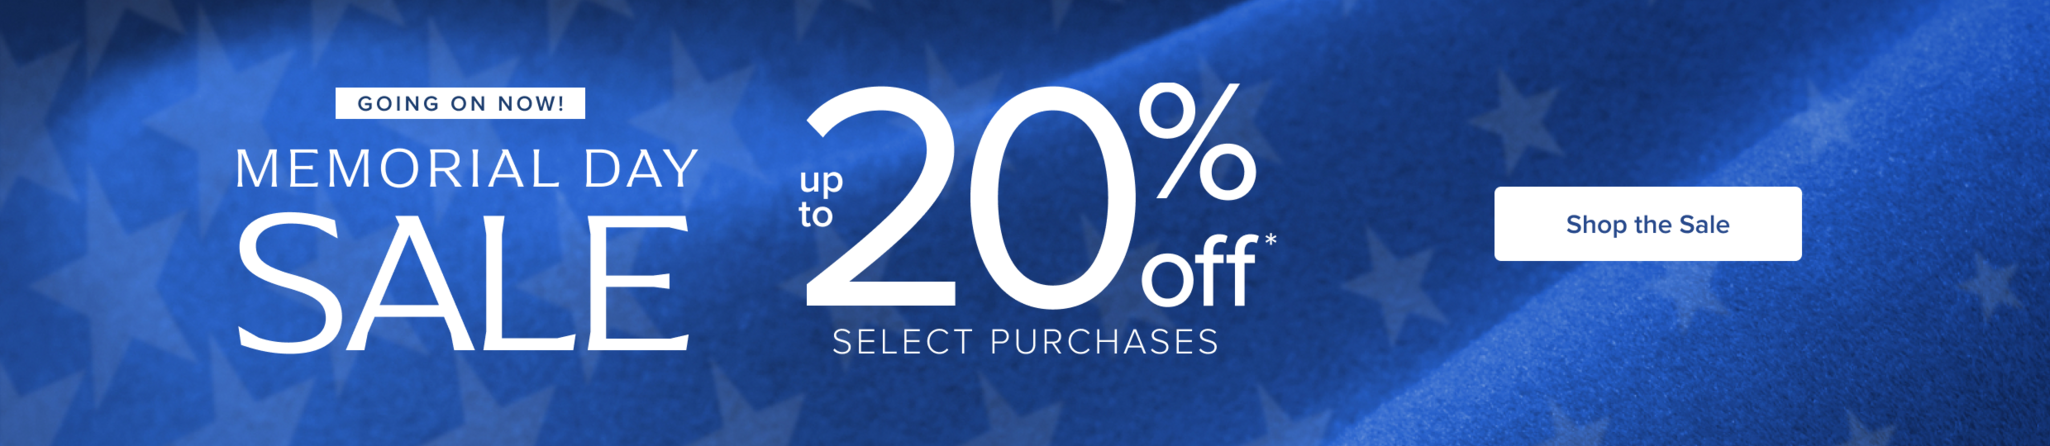 Memorial Day Sale - up to 20% Off select purchases Shop Now